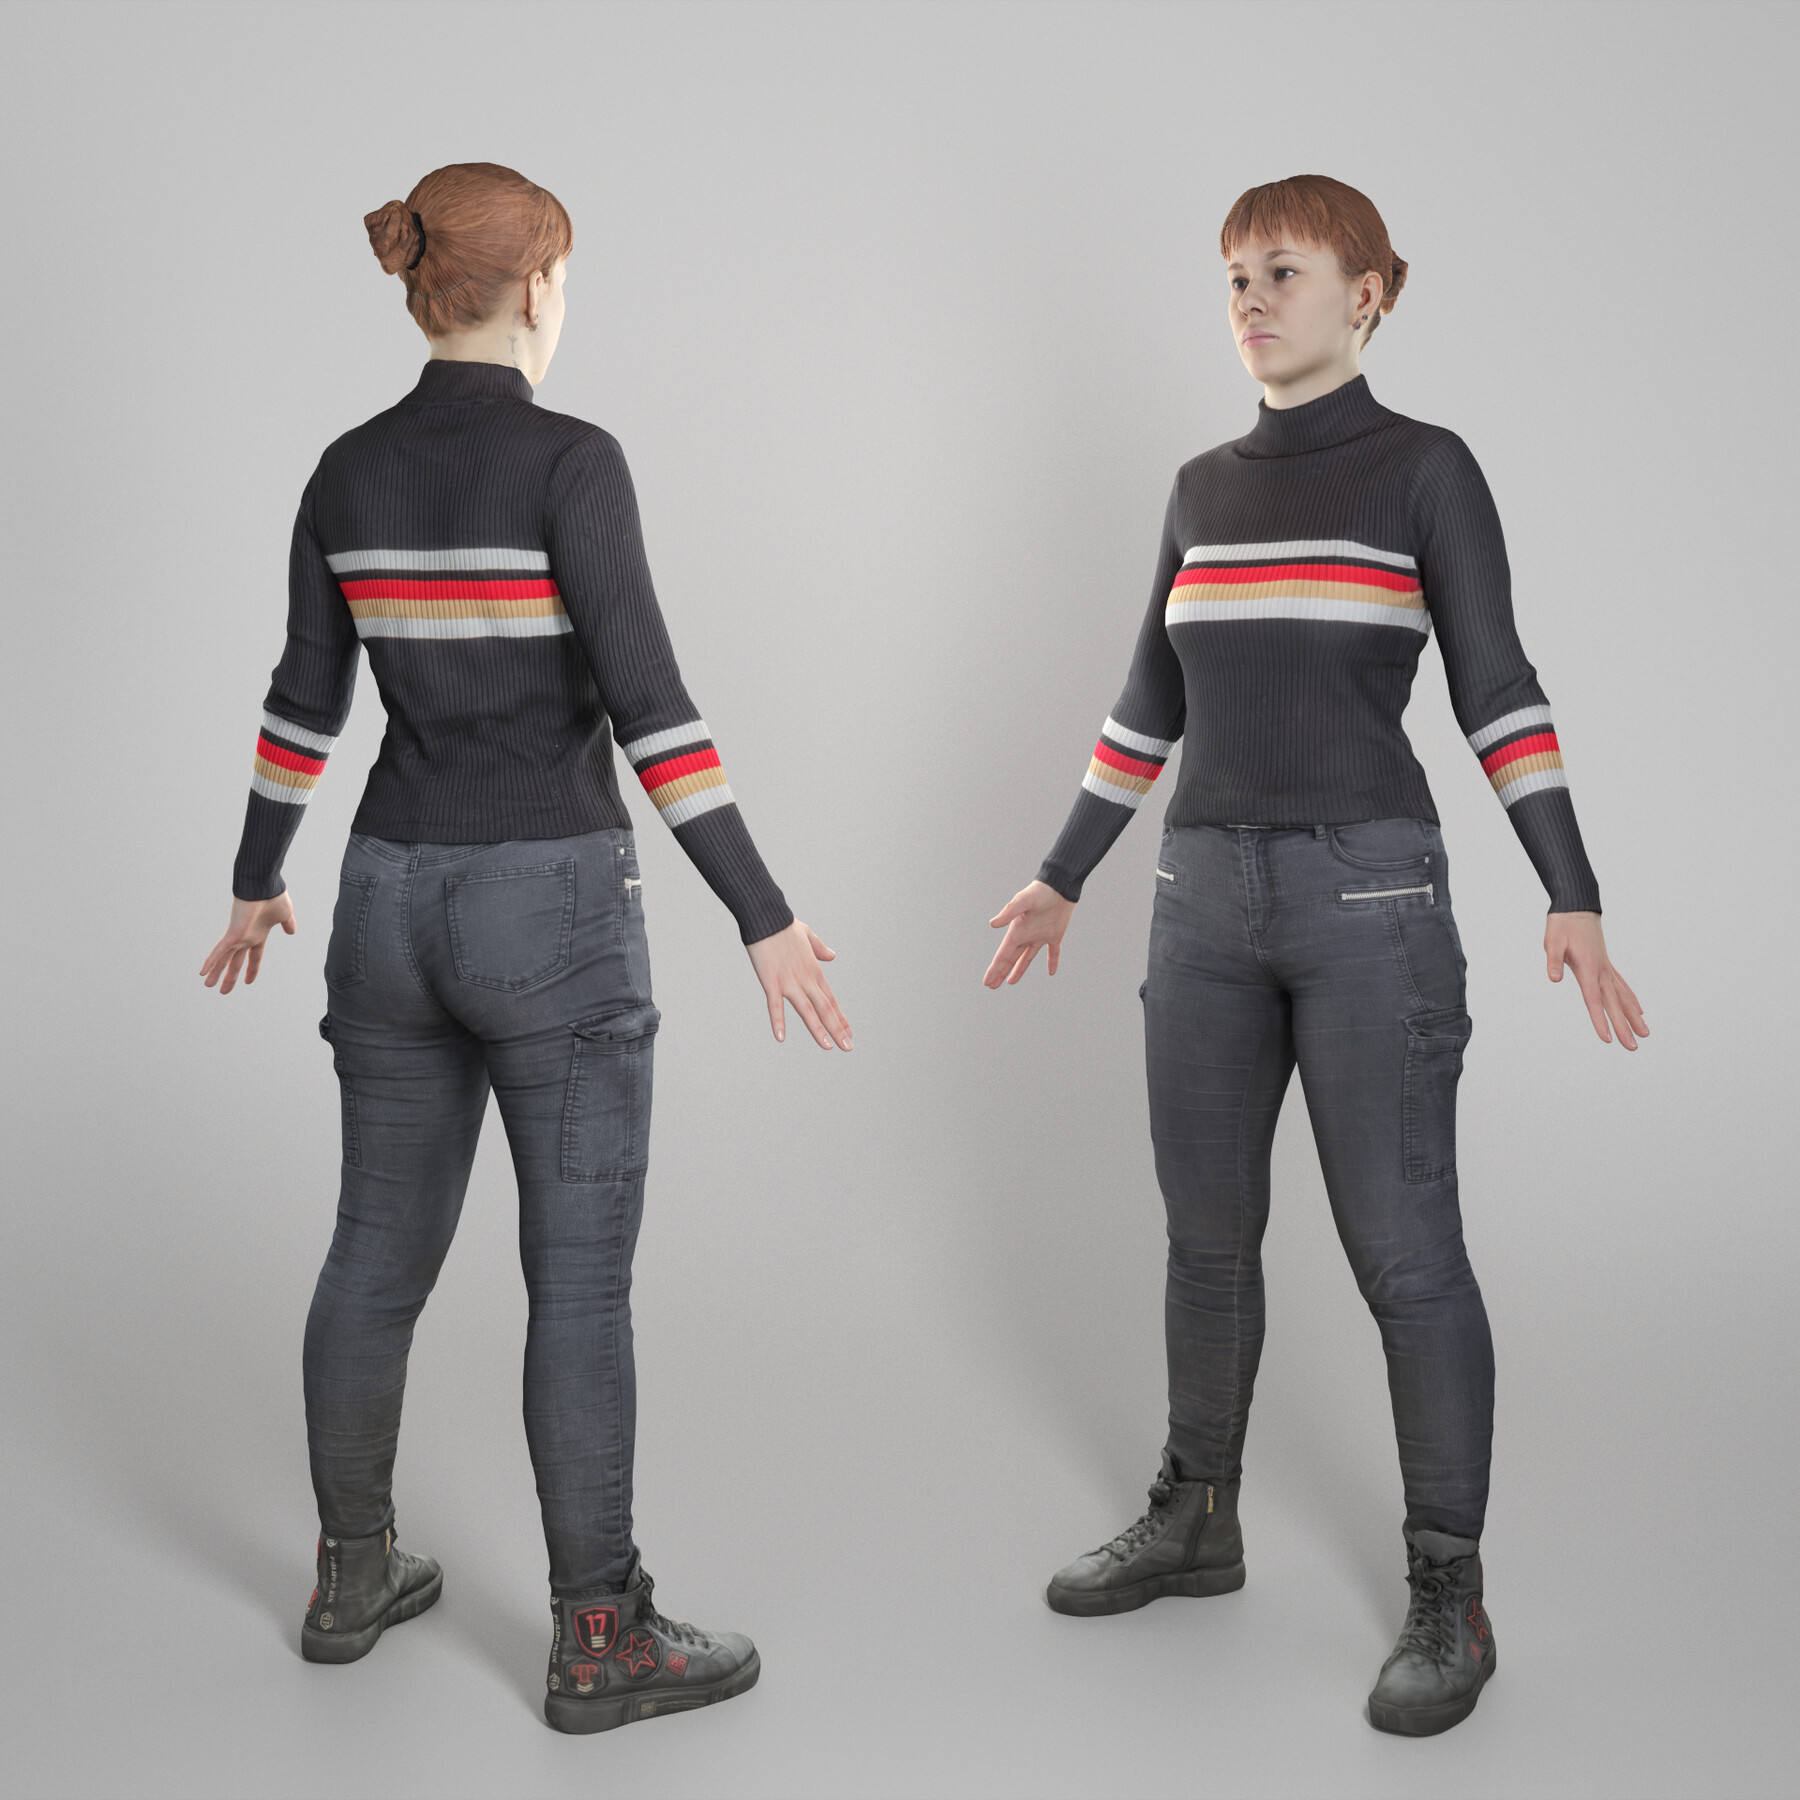 ArtStation - Woman in sweater ready for animation 306 | Game Assets